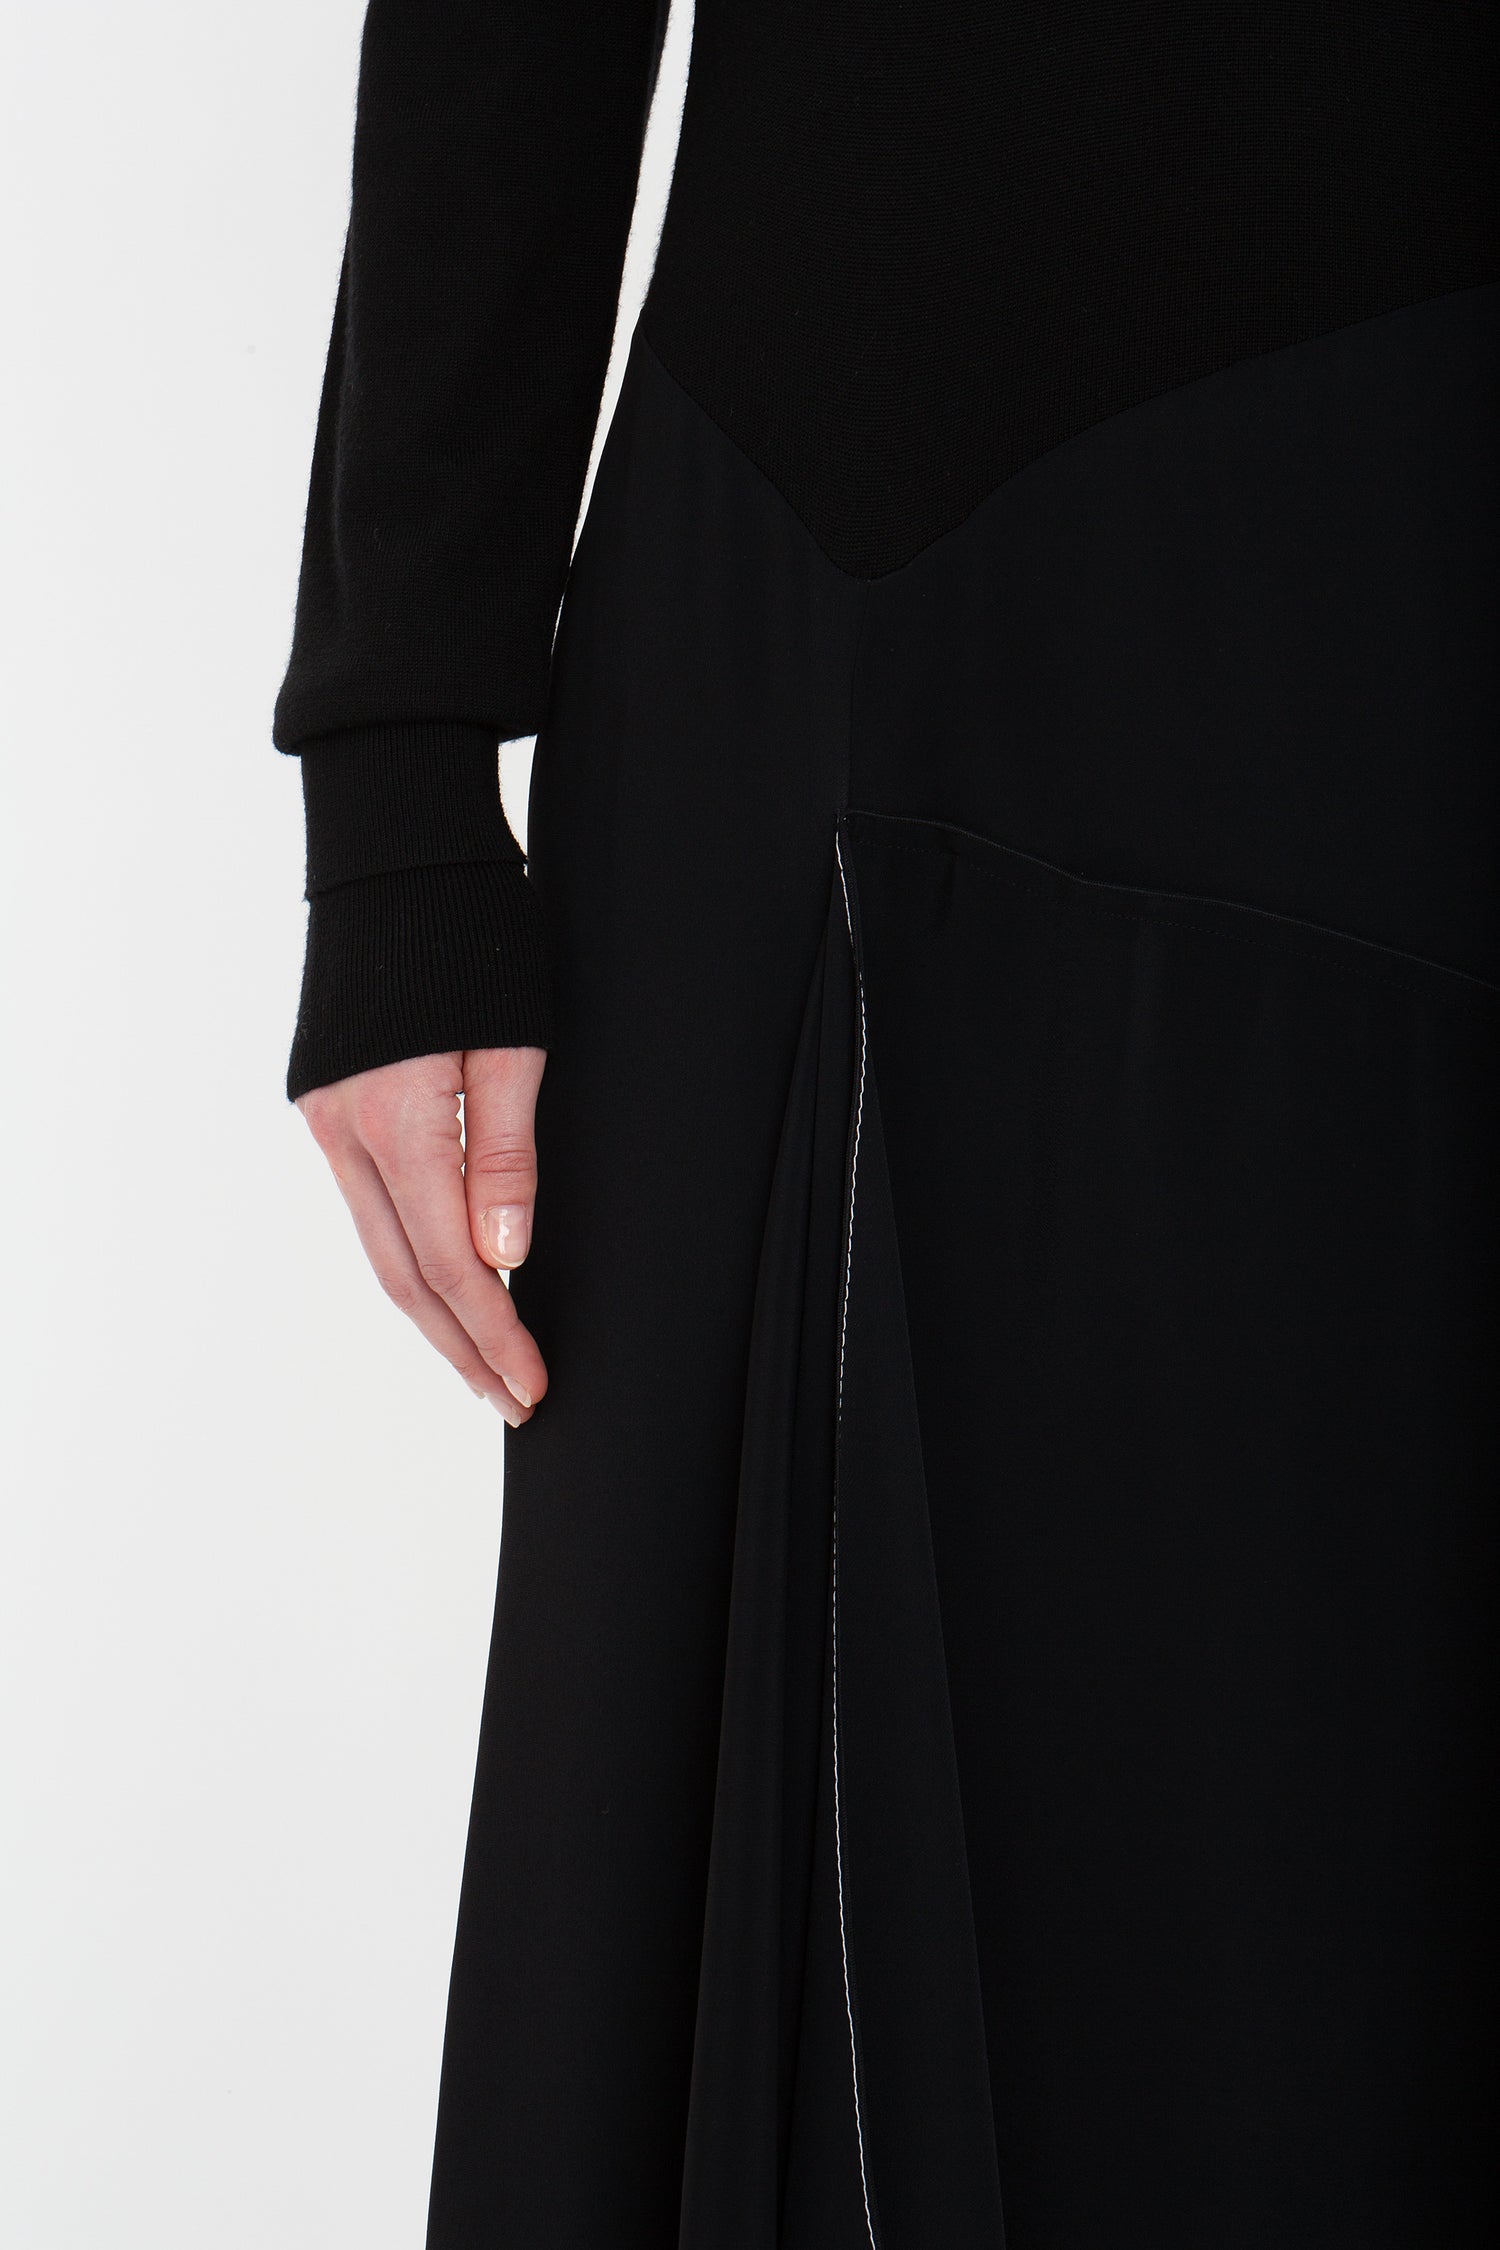 A person wearing a Henley Shirt Dress In Black by Victoria Beckham, featuring an asymmetric waist seam, shown from the neck down to mid-thigh.